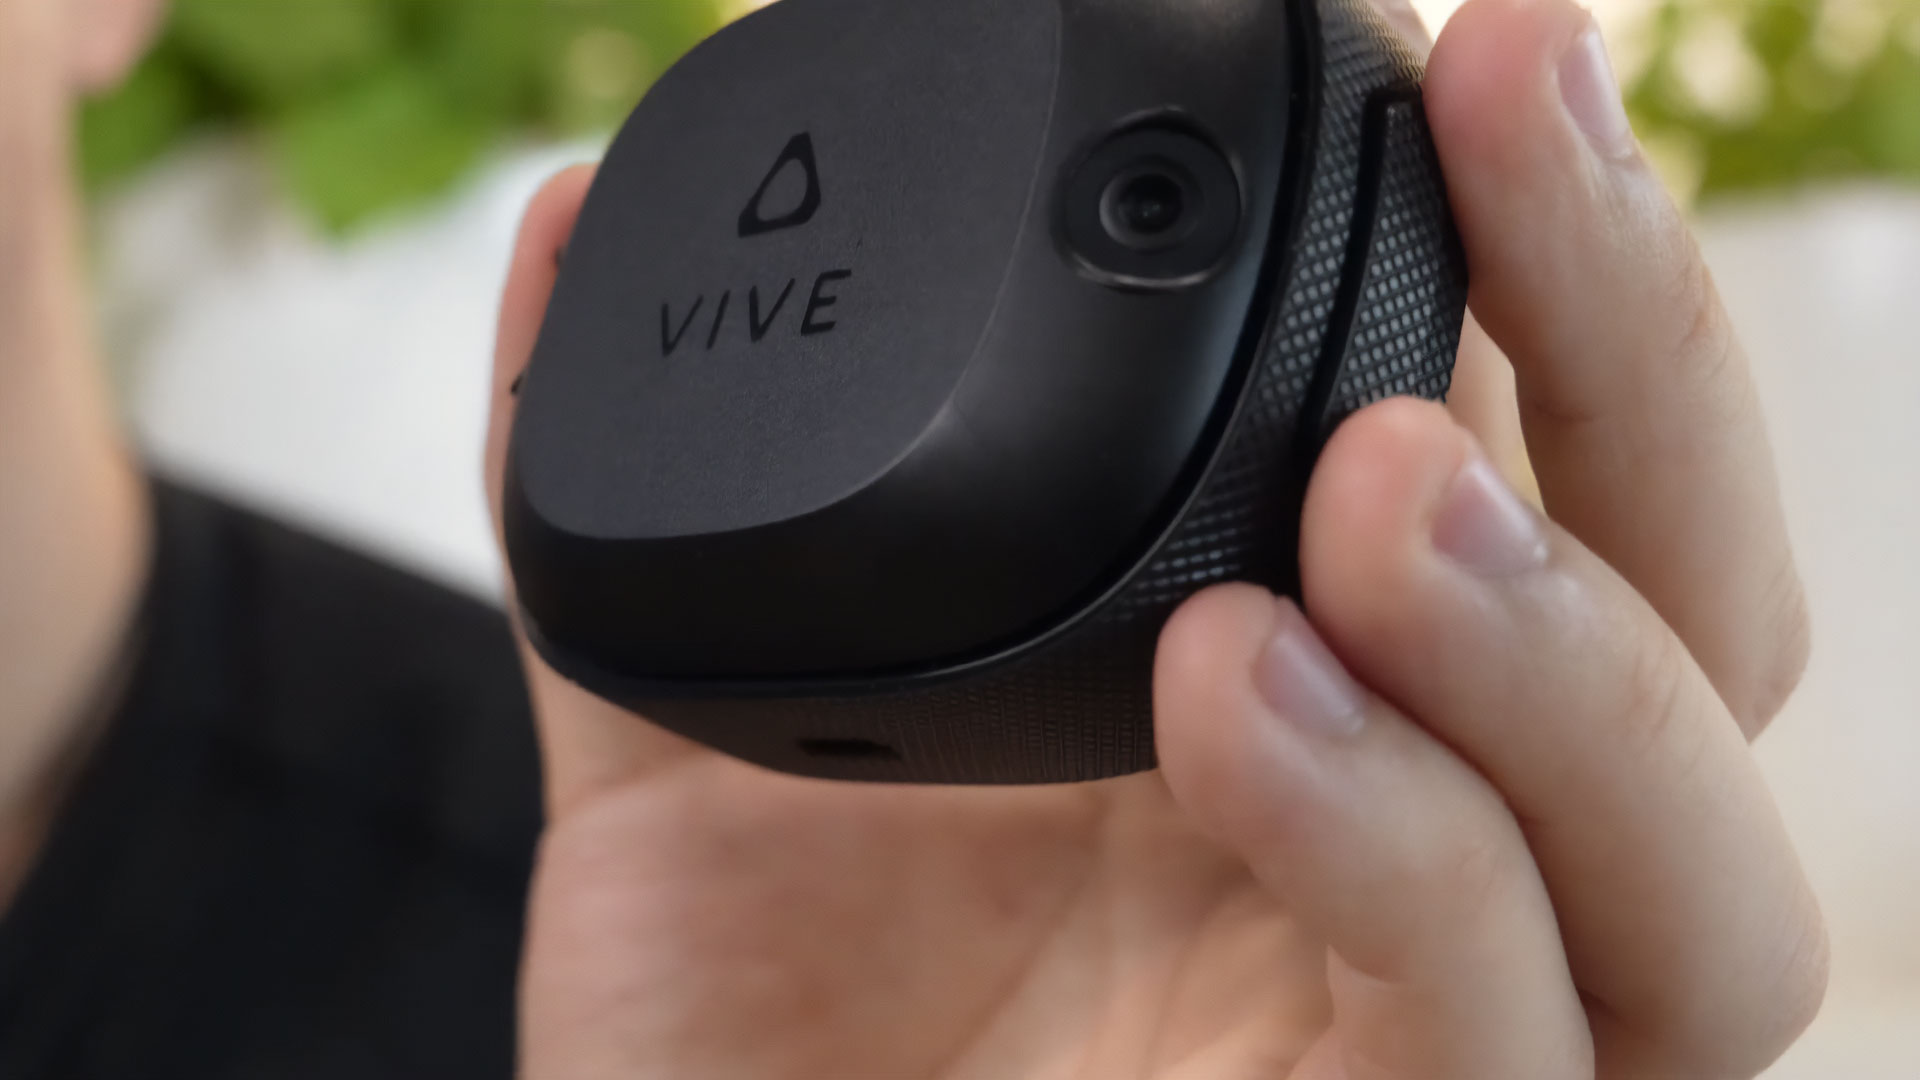 How To Use HTC Vive Without Sensors